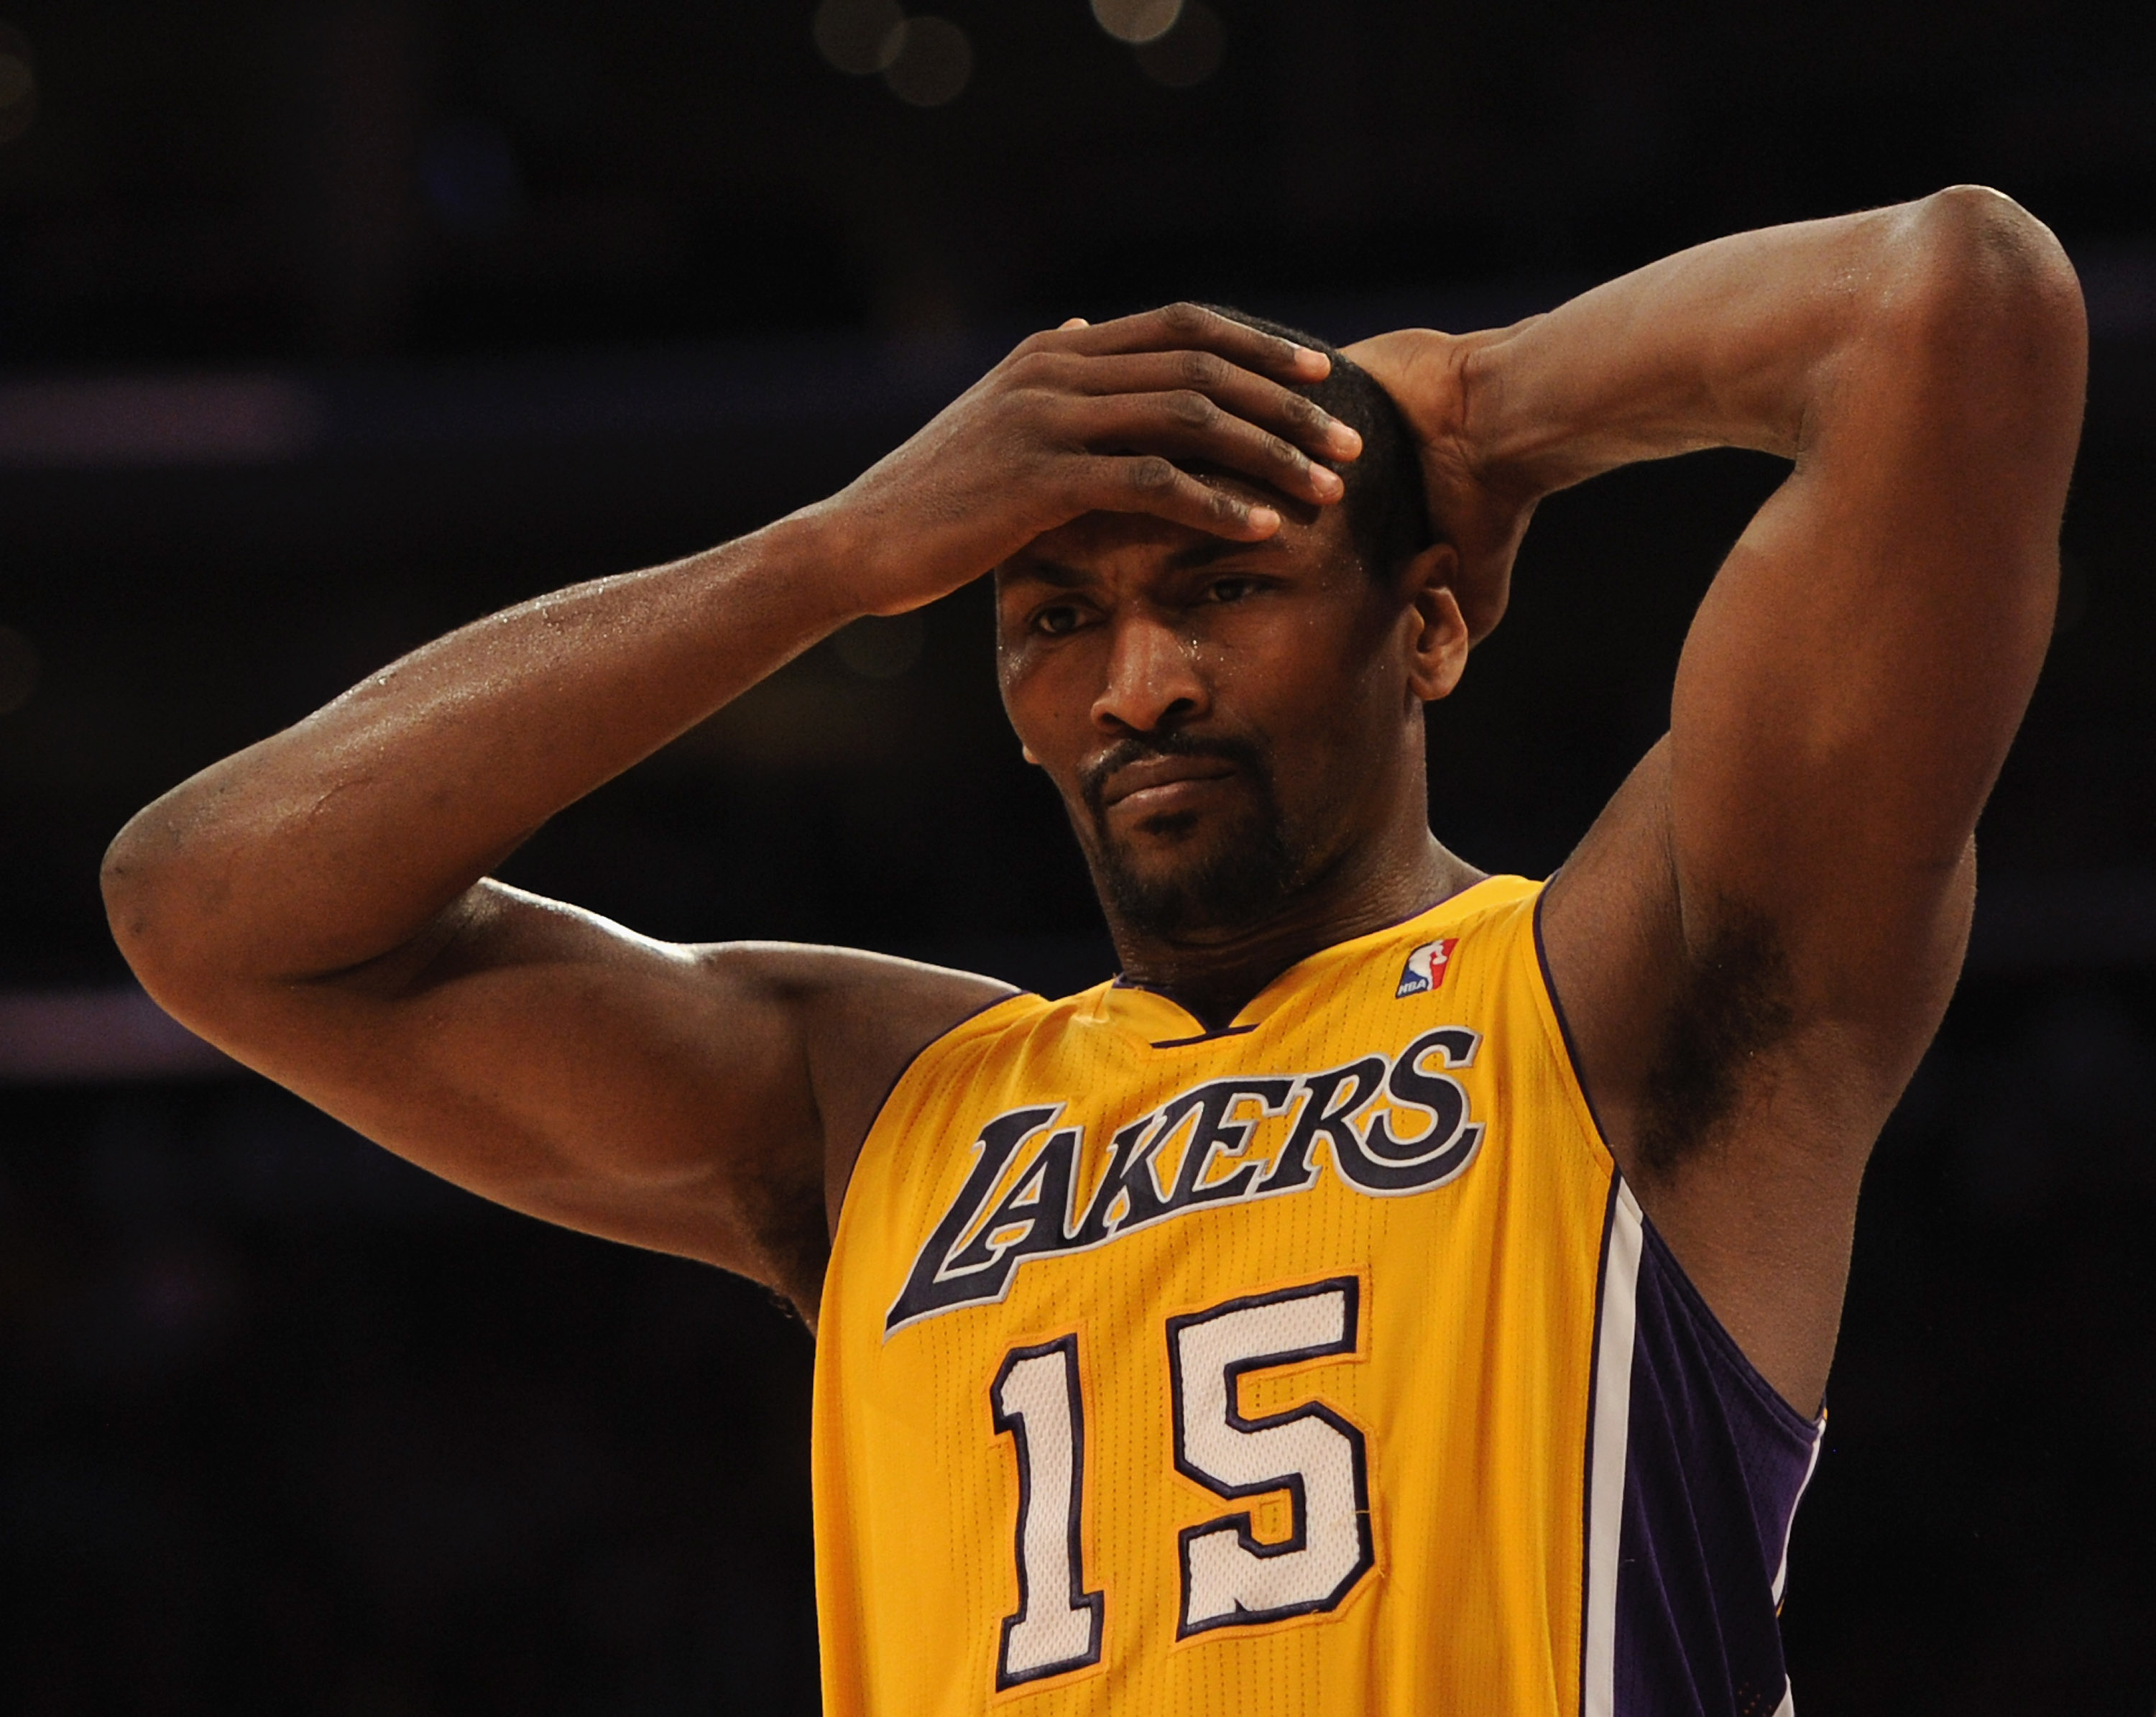 LOS ANGELES, CA - FEBRUARY 03:  Ron Artest #15 of the Los Angeles Lakers reacts on defense after a San Antonio Spurs basket during a 89-88 Spur win at Staples Center on February 3, 2011 in Los Angeles, California.  NOTE TO USER: User expressly acknowledge